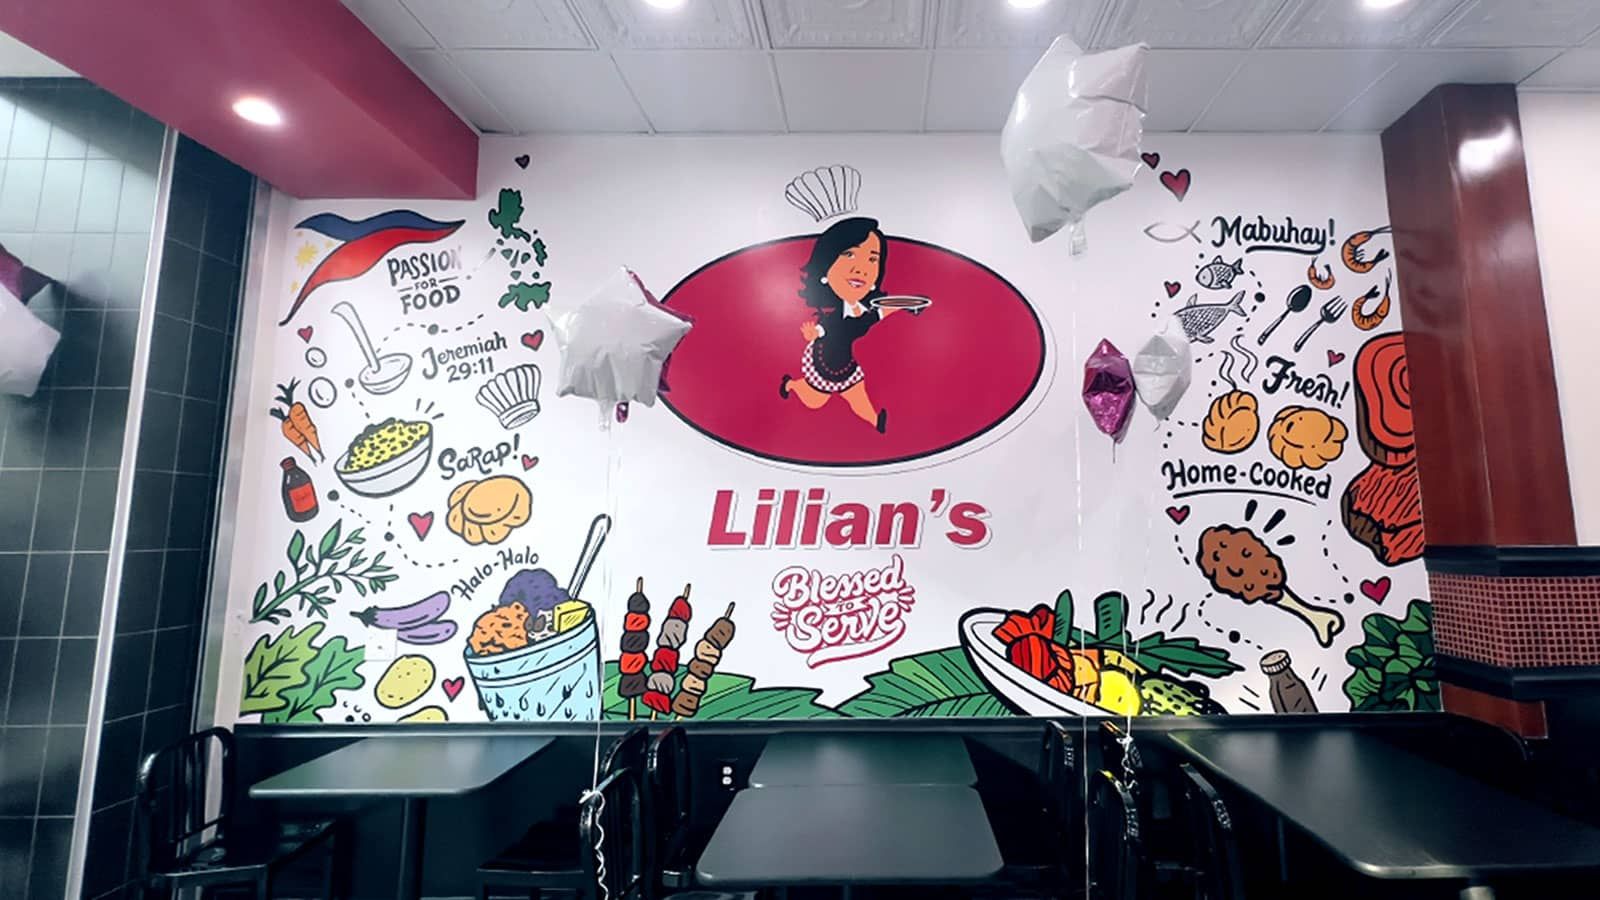 Lilian's Bread and Sweets restaurant wall graphics